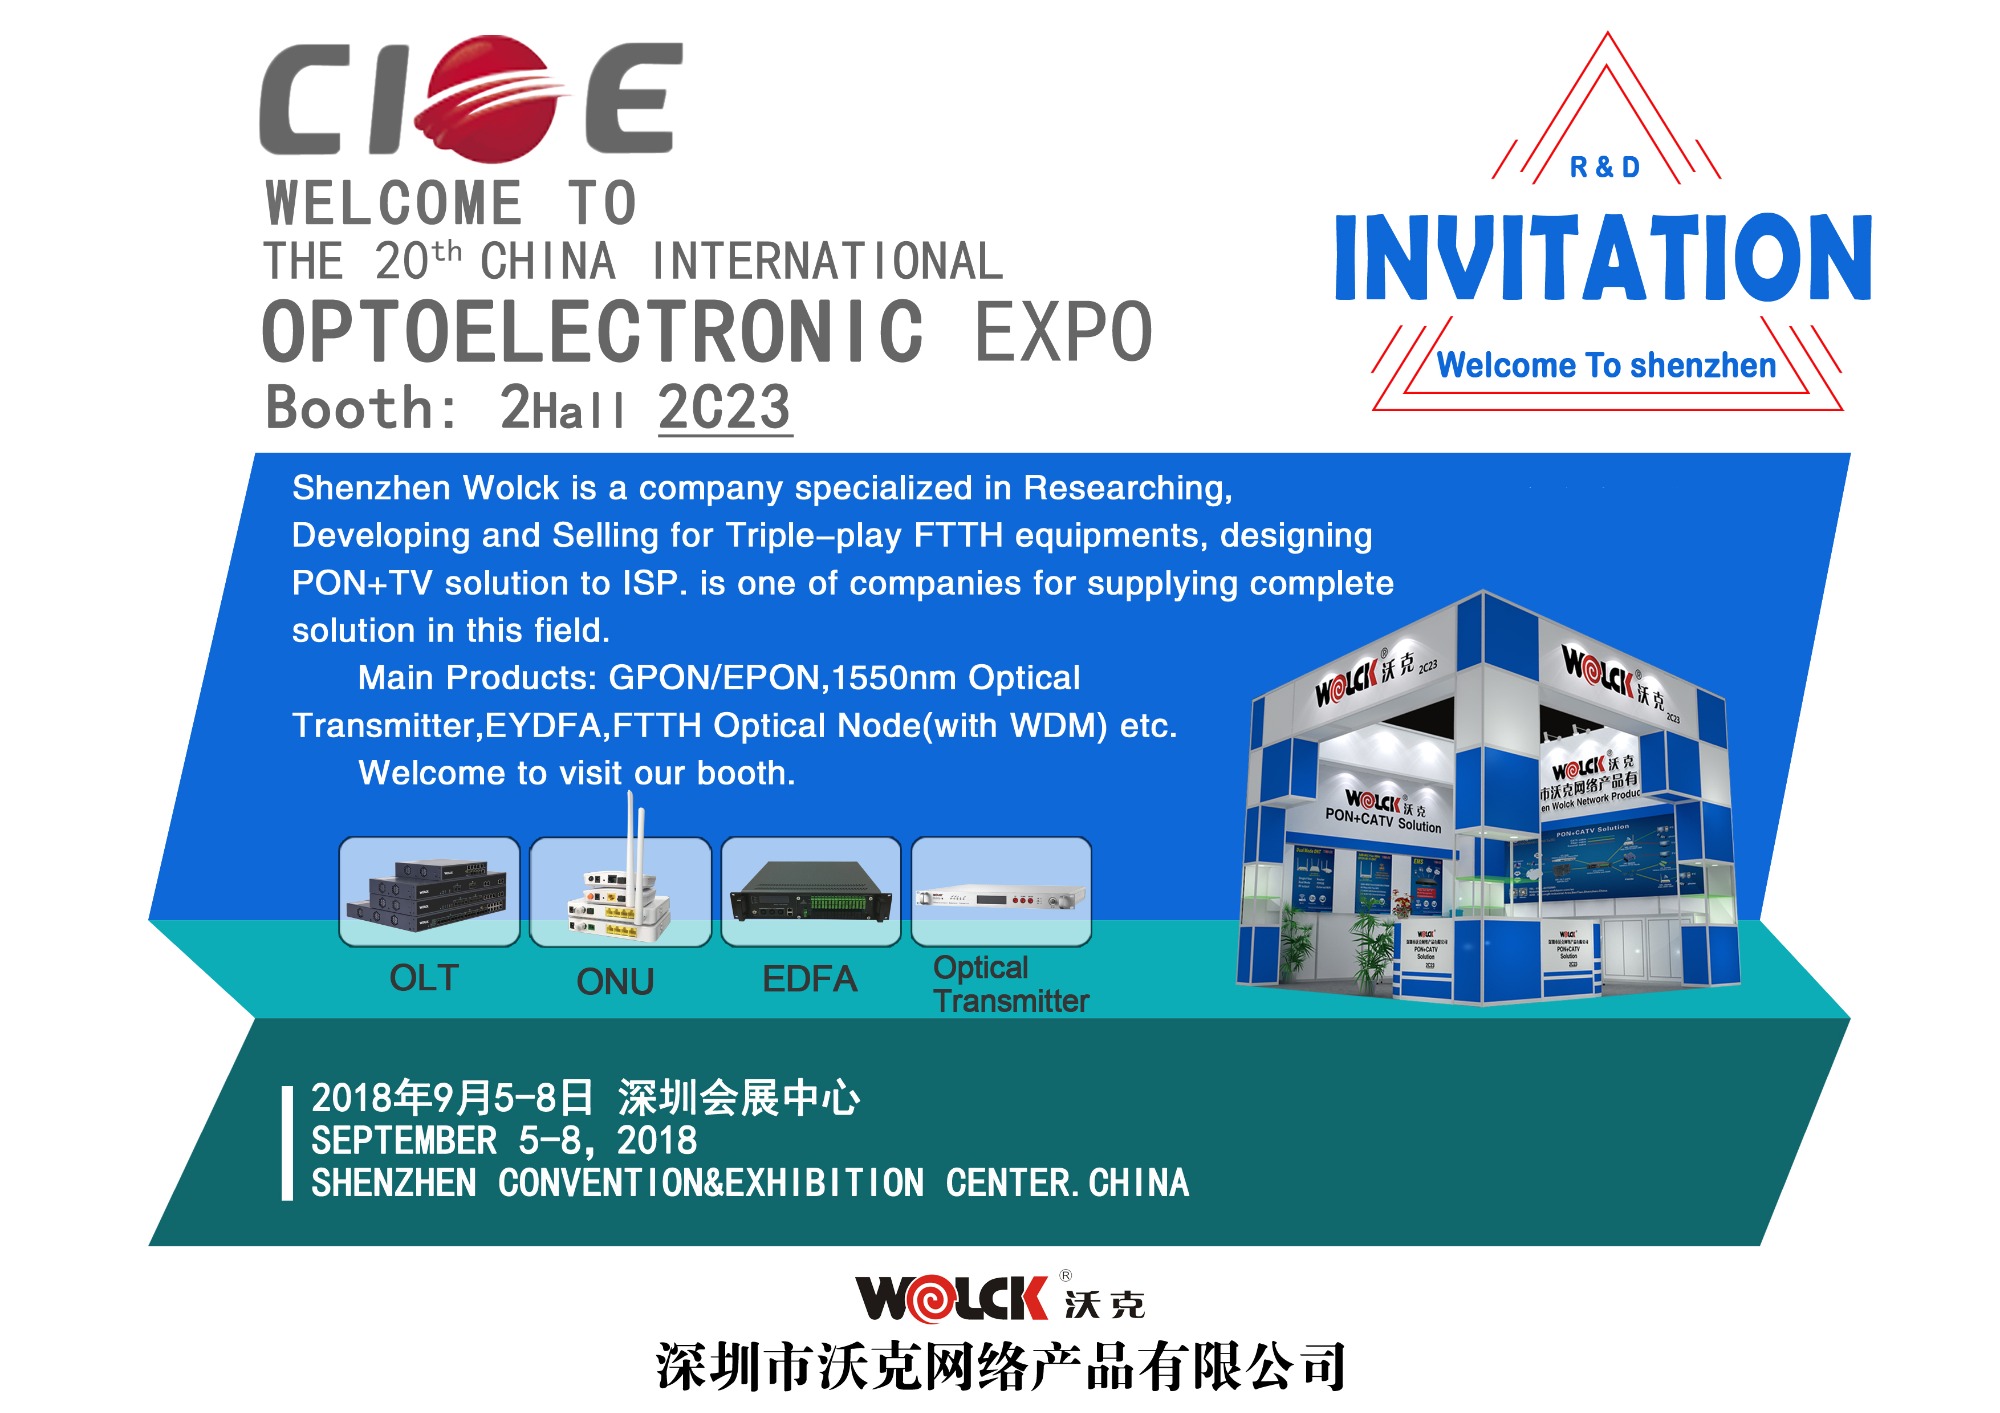 WOLCK invites you to participate in the "20th China International Optoelectronic Exposition (CIOE2018)"